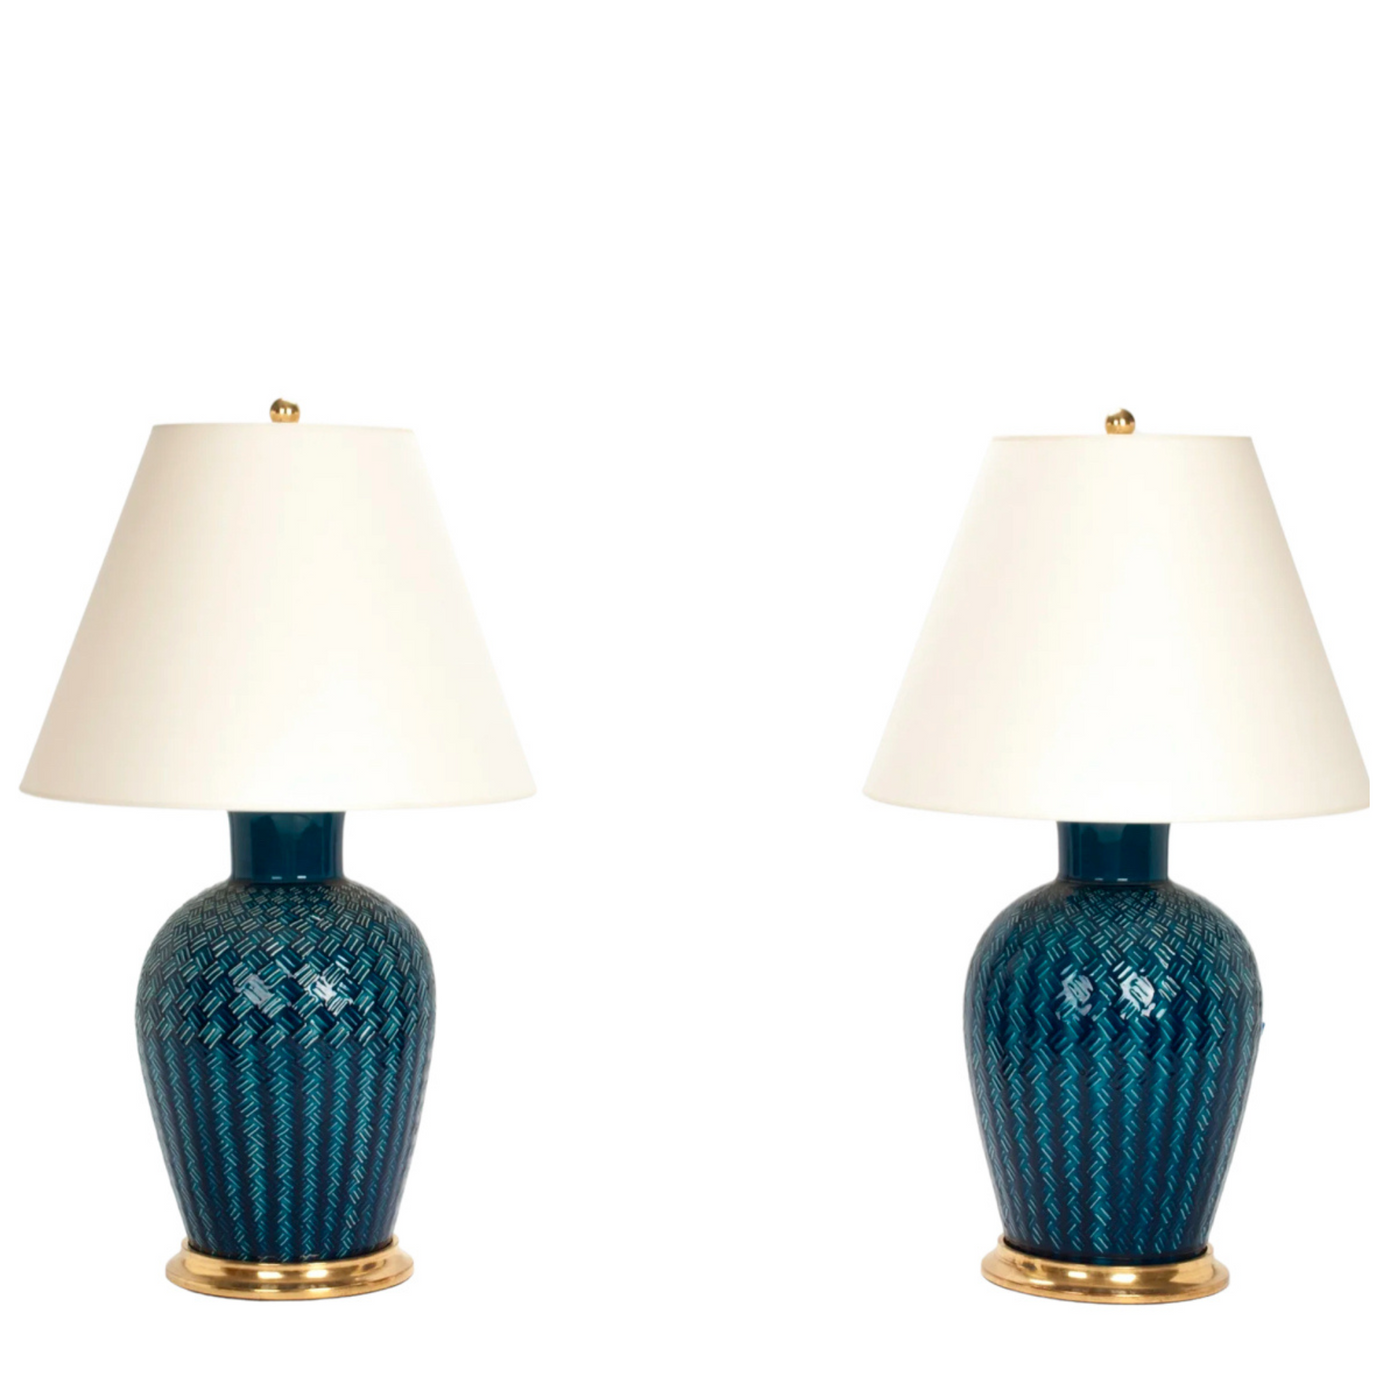 A Pair of Penny Table Lamps in Prussian Blue Basketweave by Christopher Spitzmiller | Newport Lamp And Shade | Located in Newport, RI